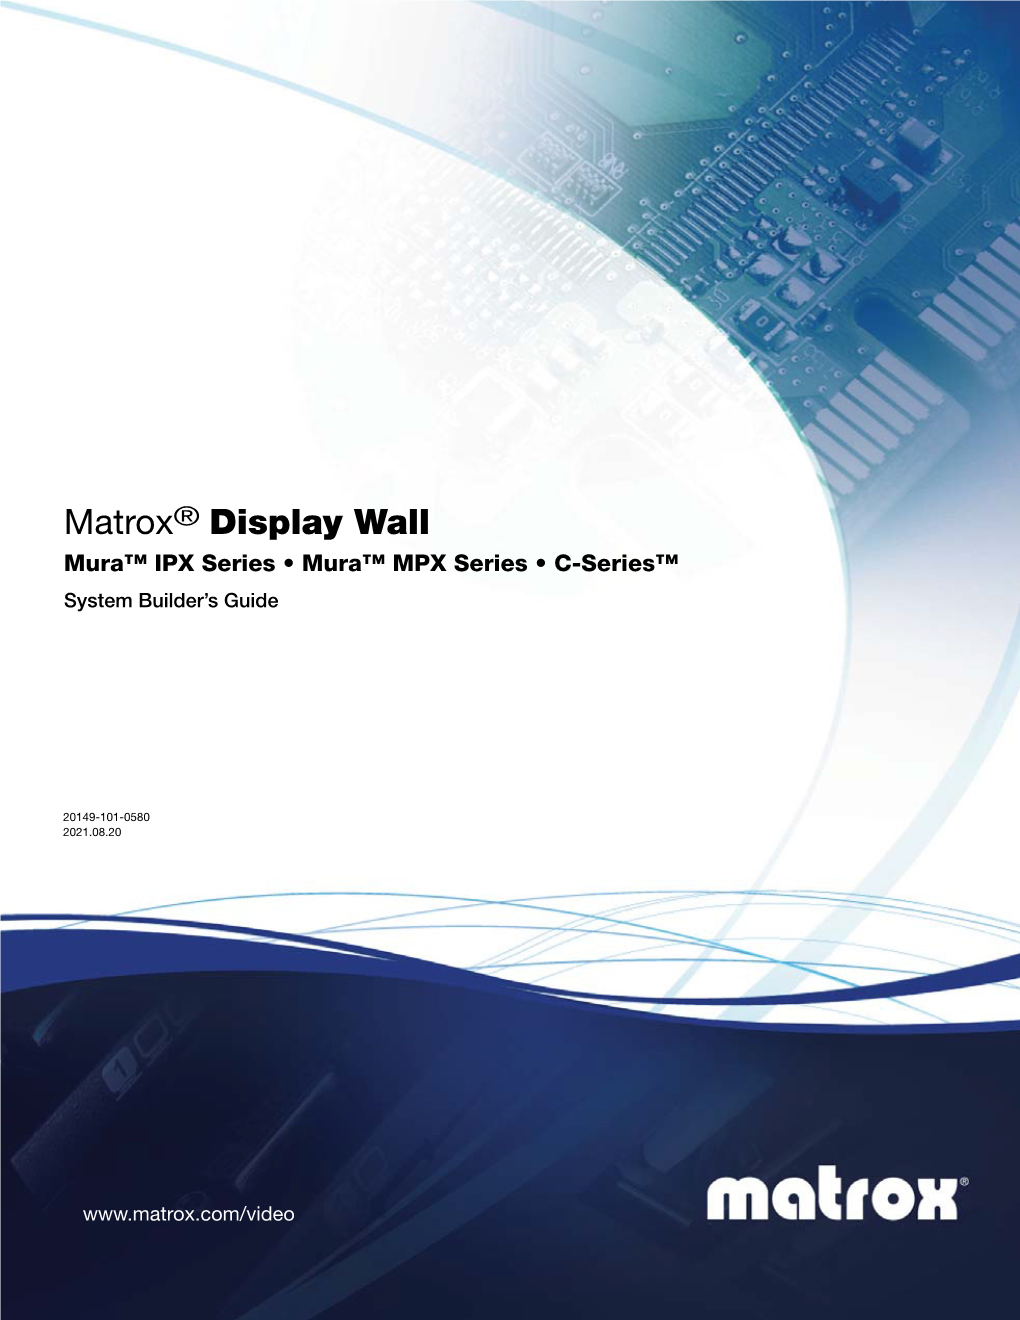 Matrox Display Wall System Builder's Guide